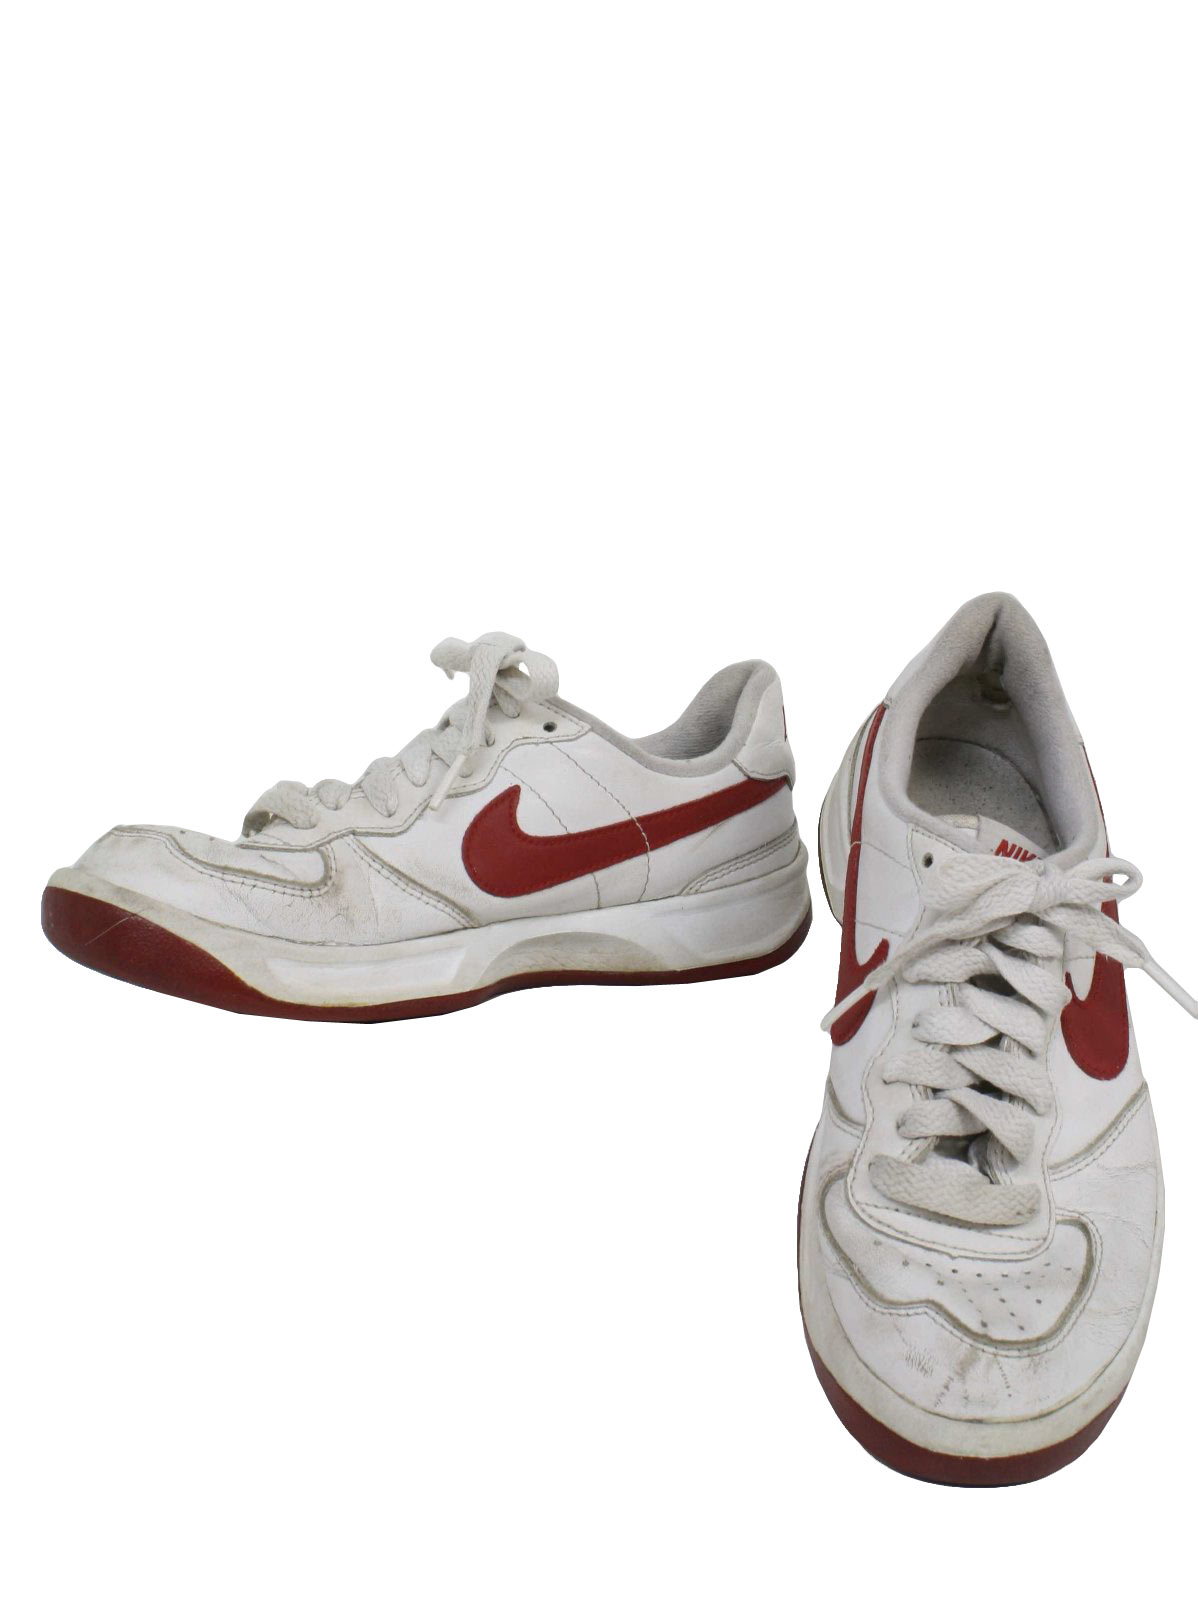 empujoncito hazlo plano Matemáticas 1990s Vintage Shoes: 90s -Nike- Mens white with red swoosh flat bottom old  school style tennis shoes. Shoes show light wear but still have a long life  to live. Would look awesome